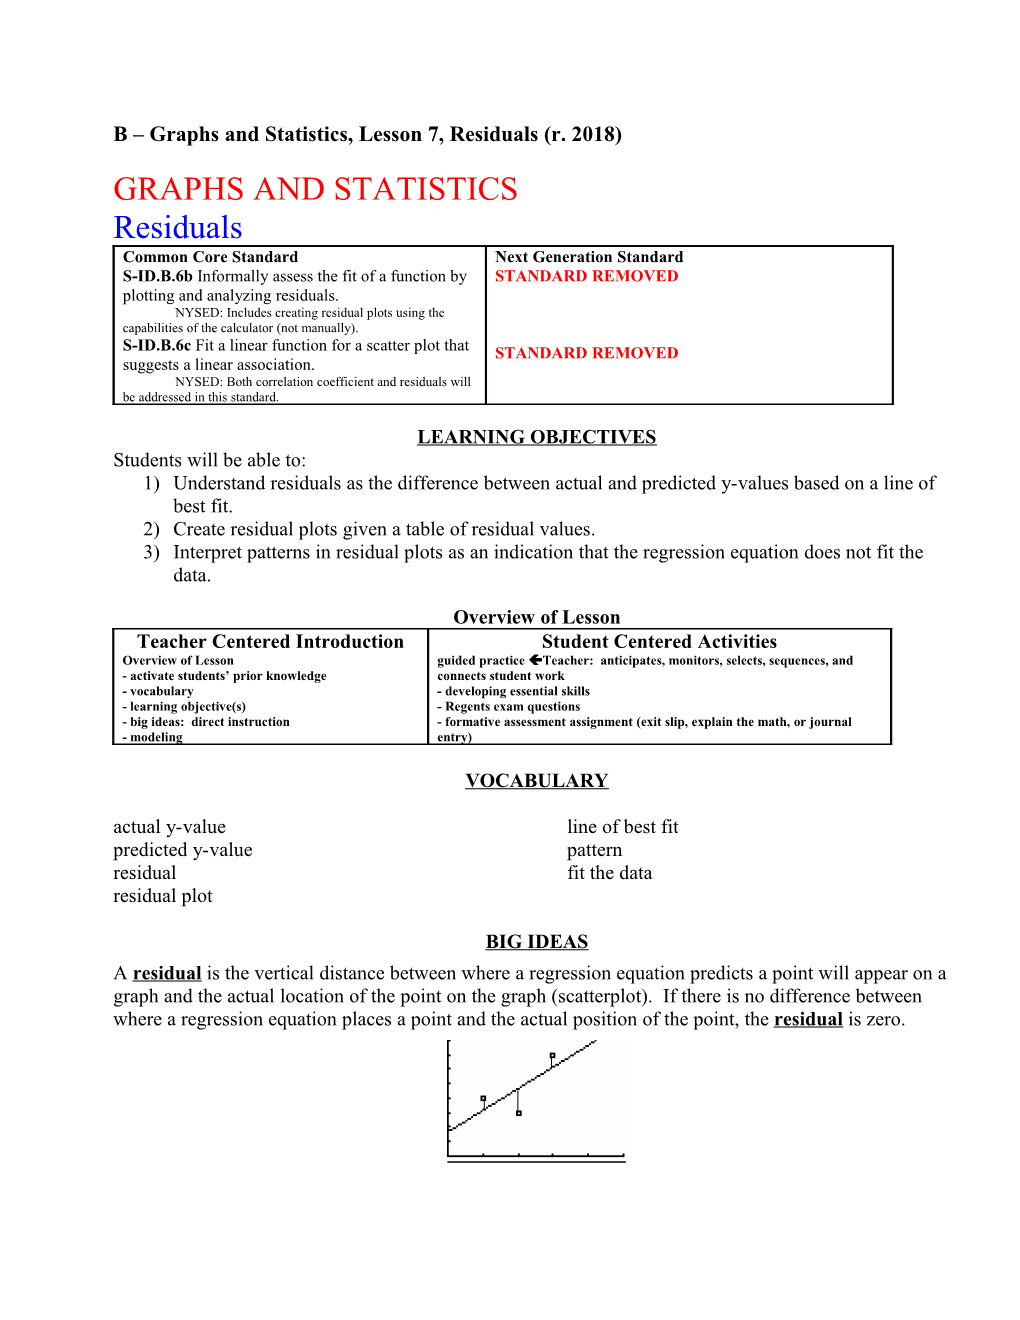 B Graphs and Statistics, Lesson 7, Residuals (R. 2018)